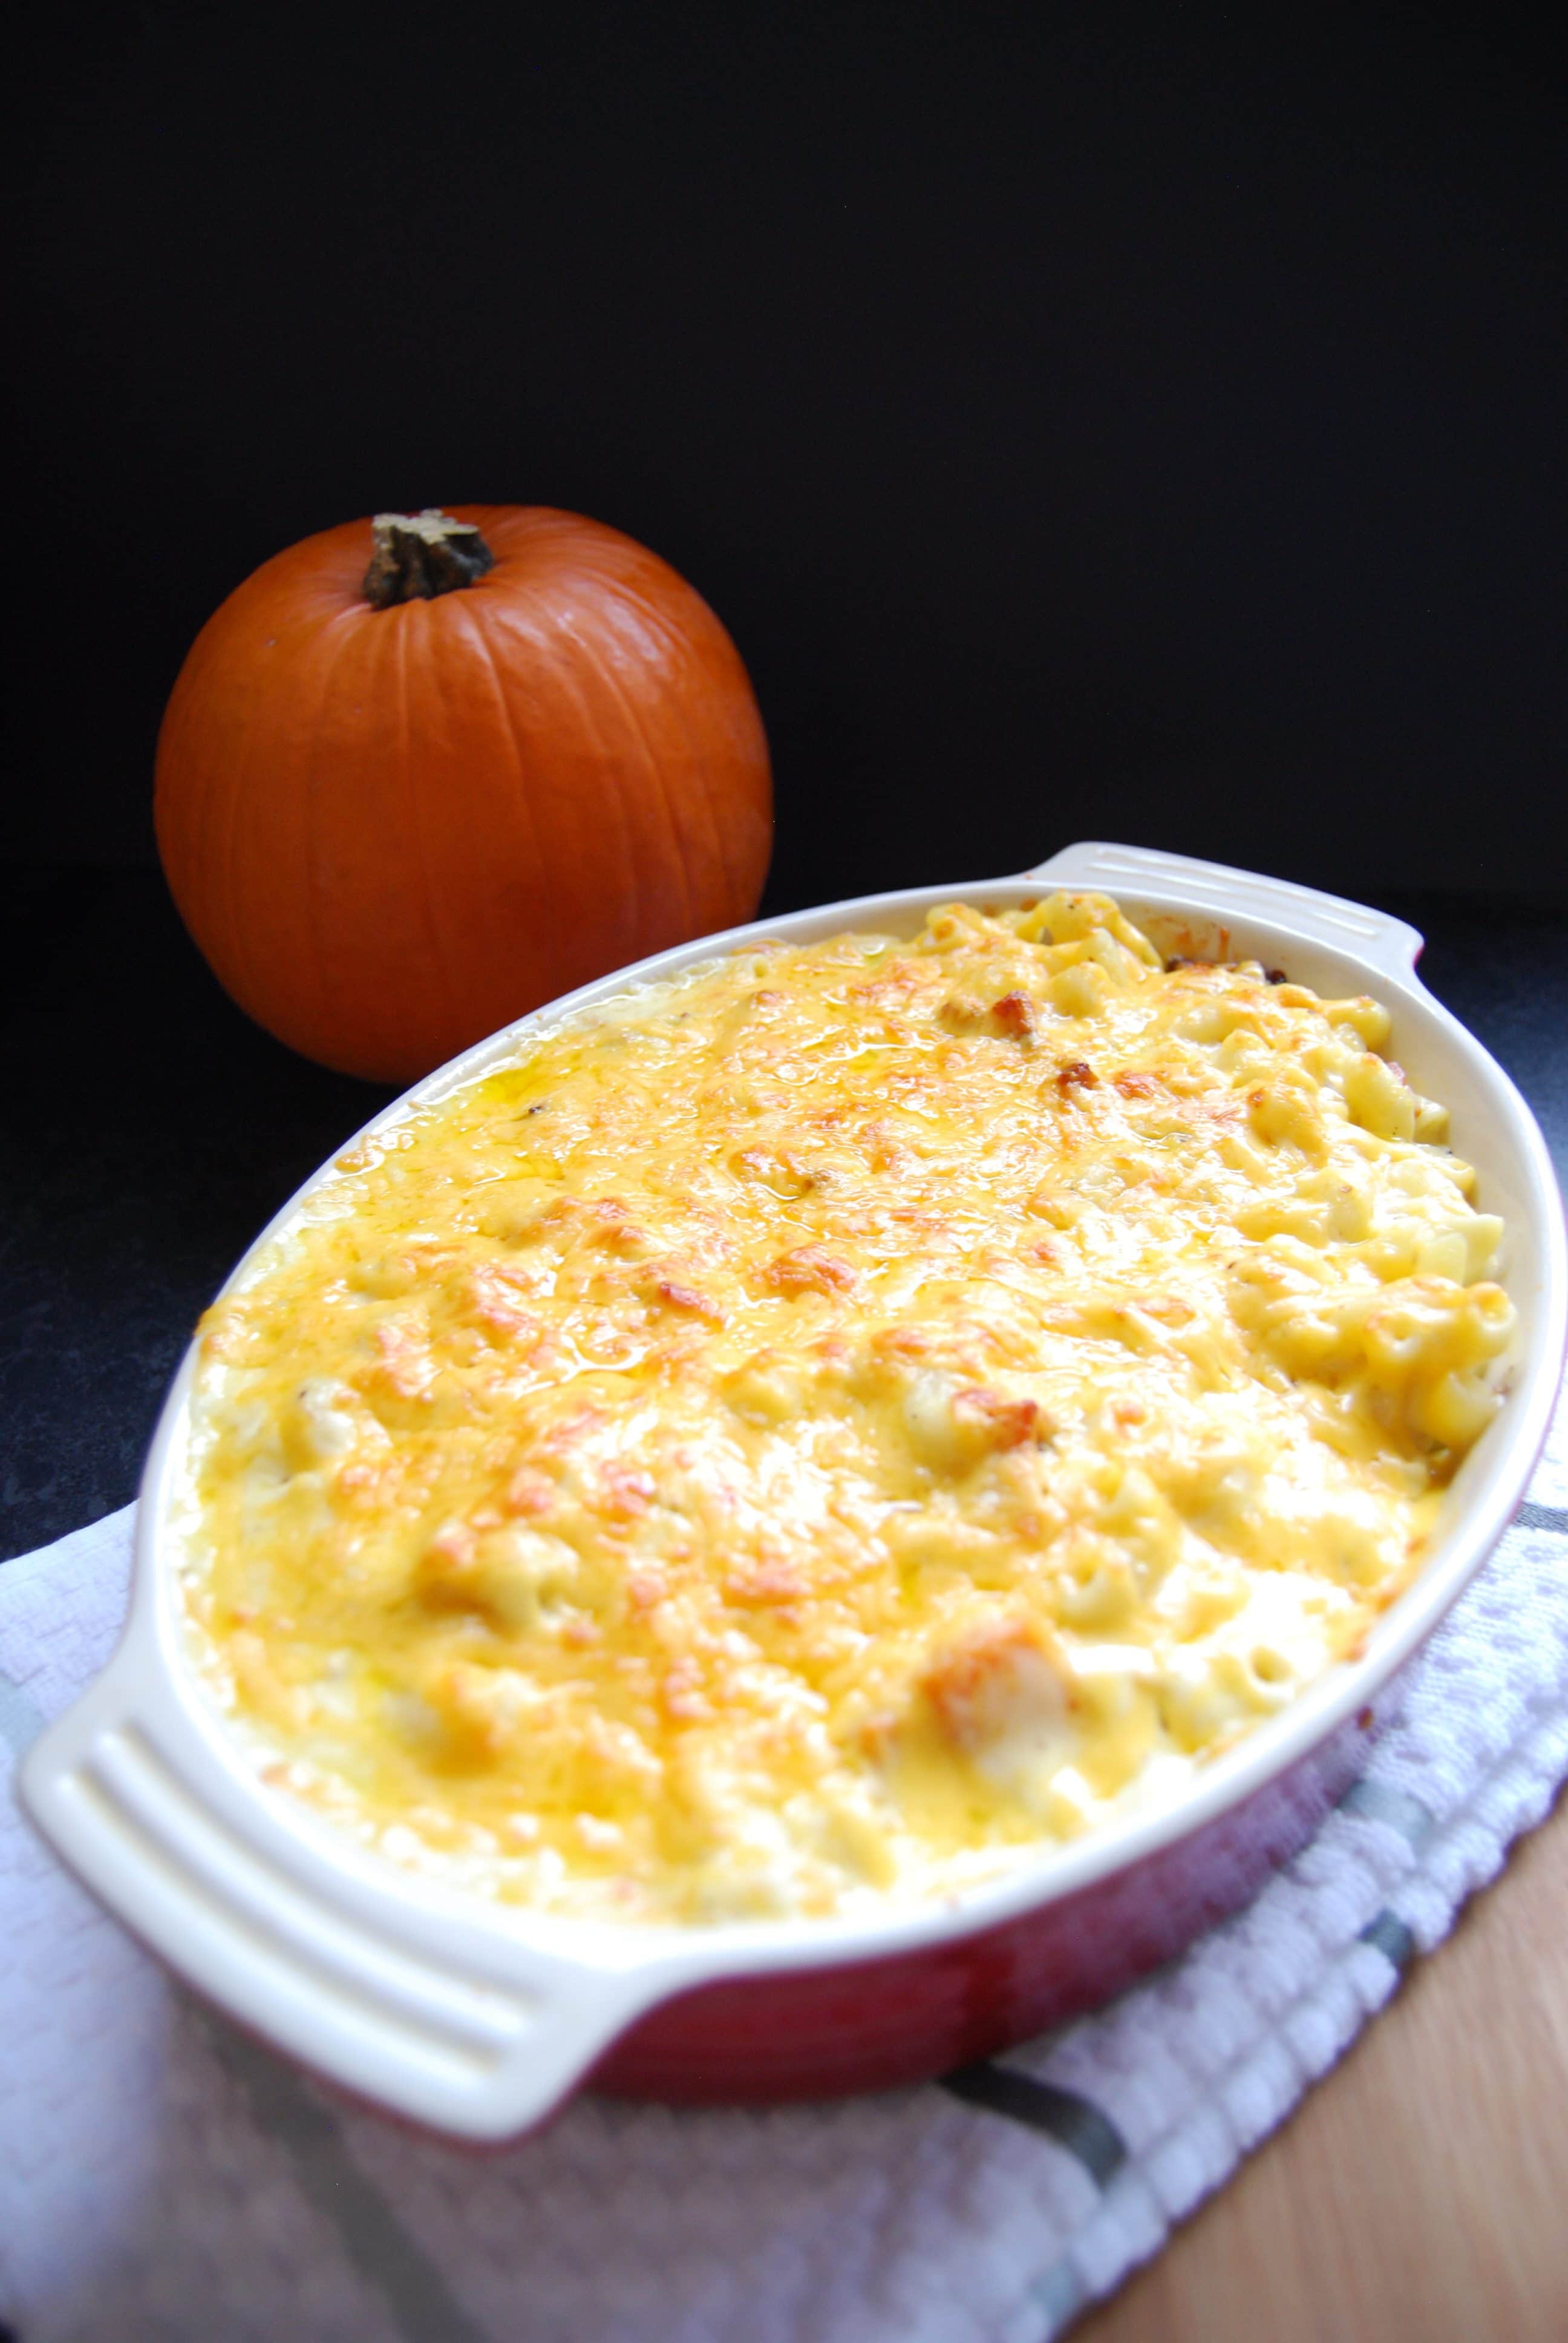 A dish of roasted pumpkin macaroni cheese. The macaroni is golden and bubbling. A pumpkin can be seen in the background of the photo.